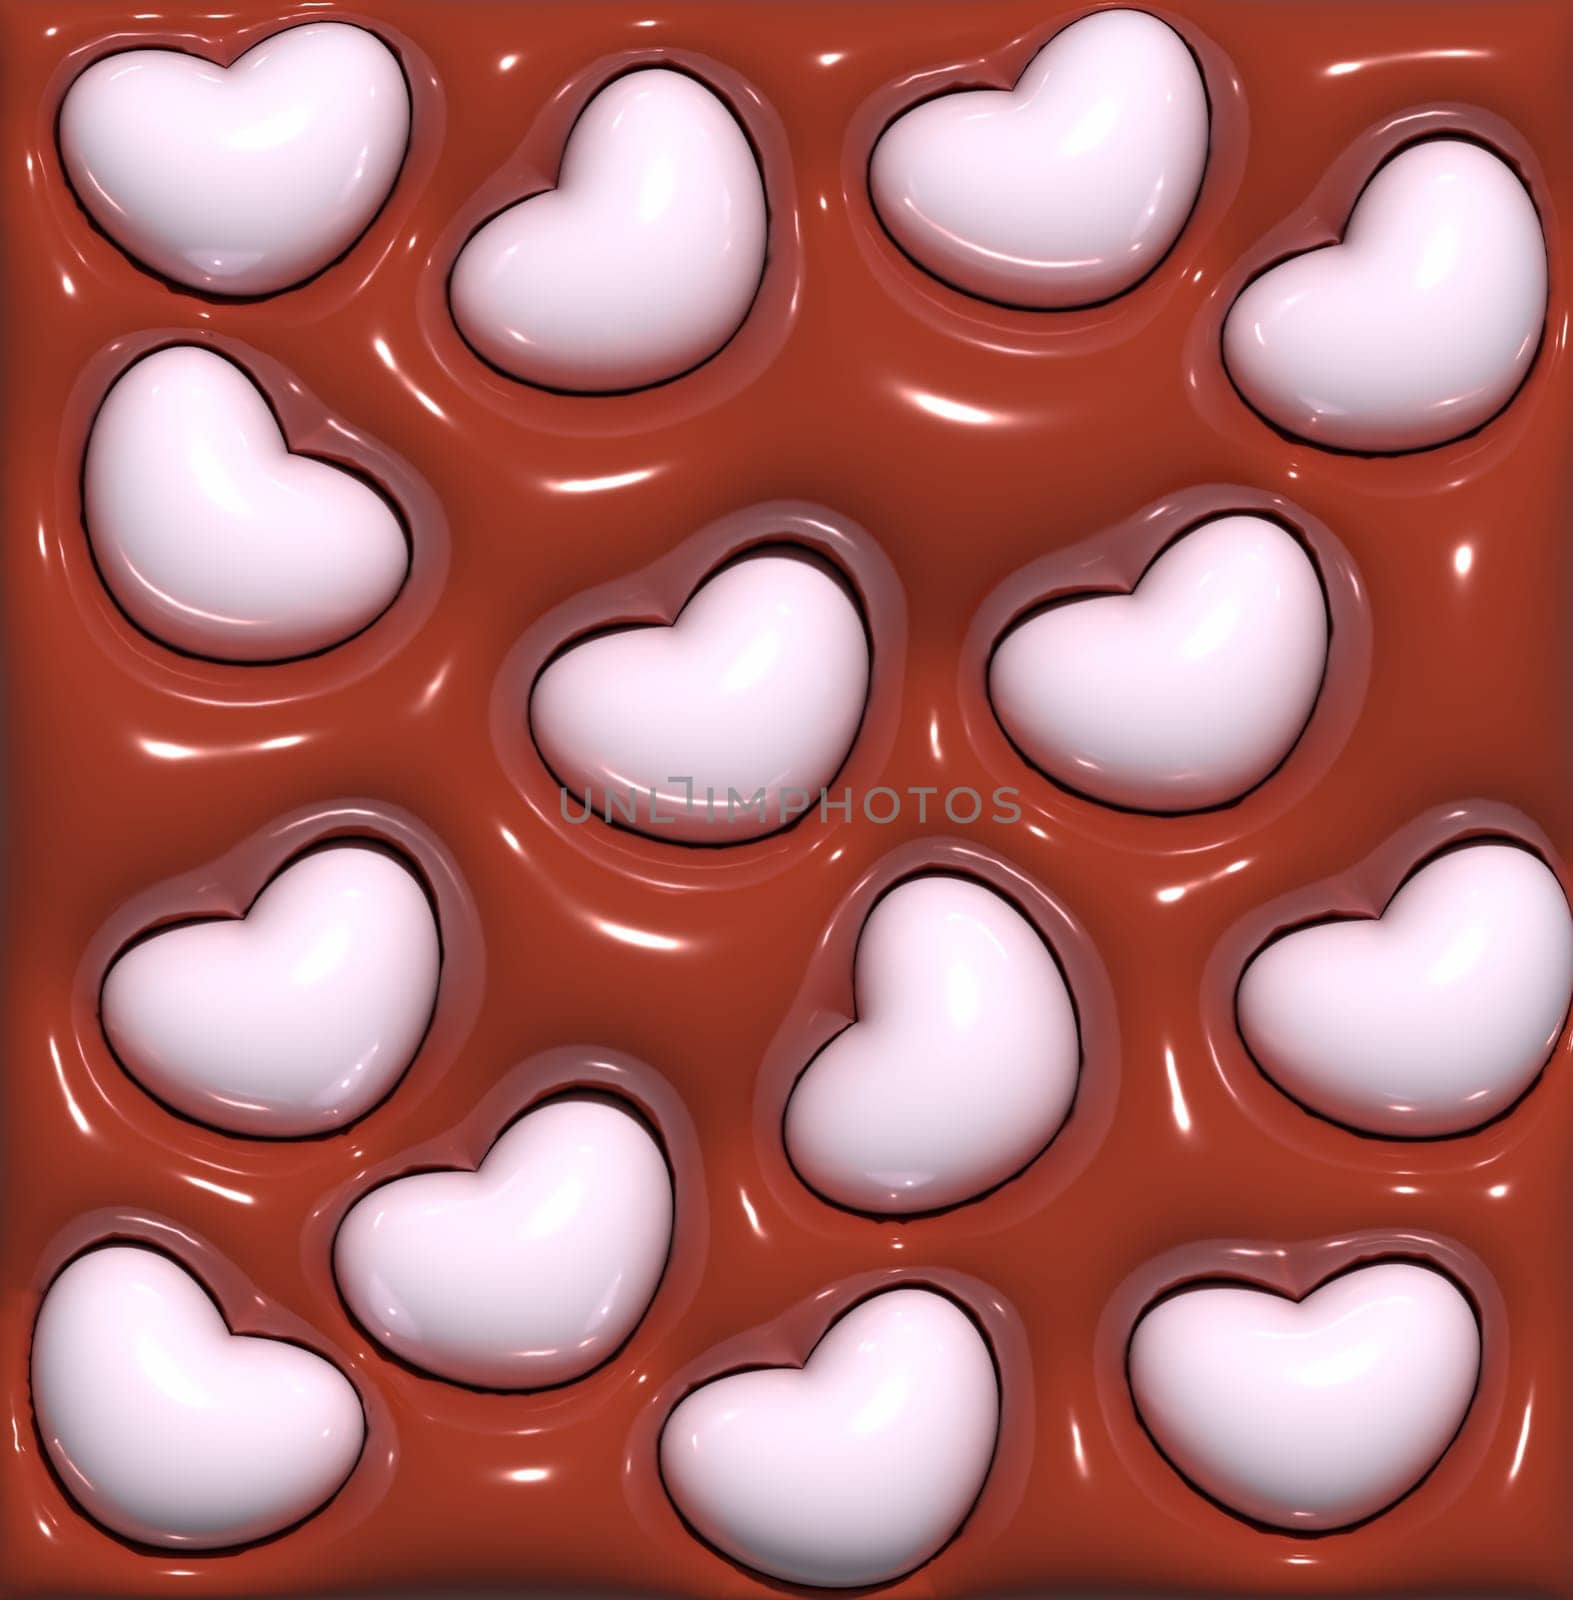 Abstract red background with white hearts, 3D illustration by ndanko